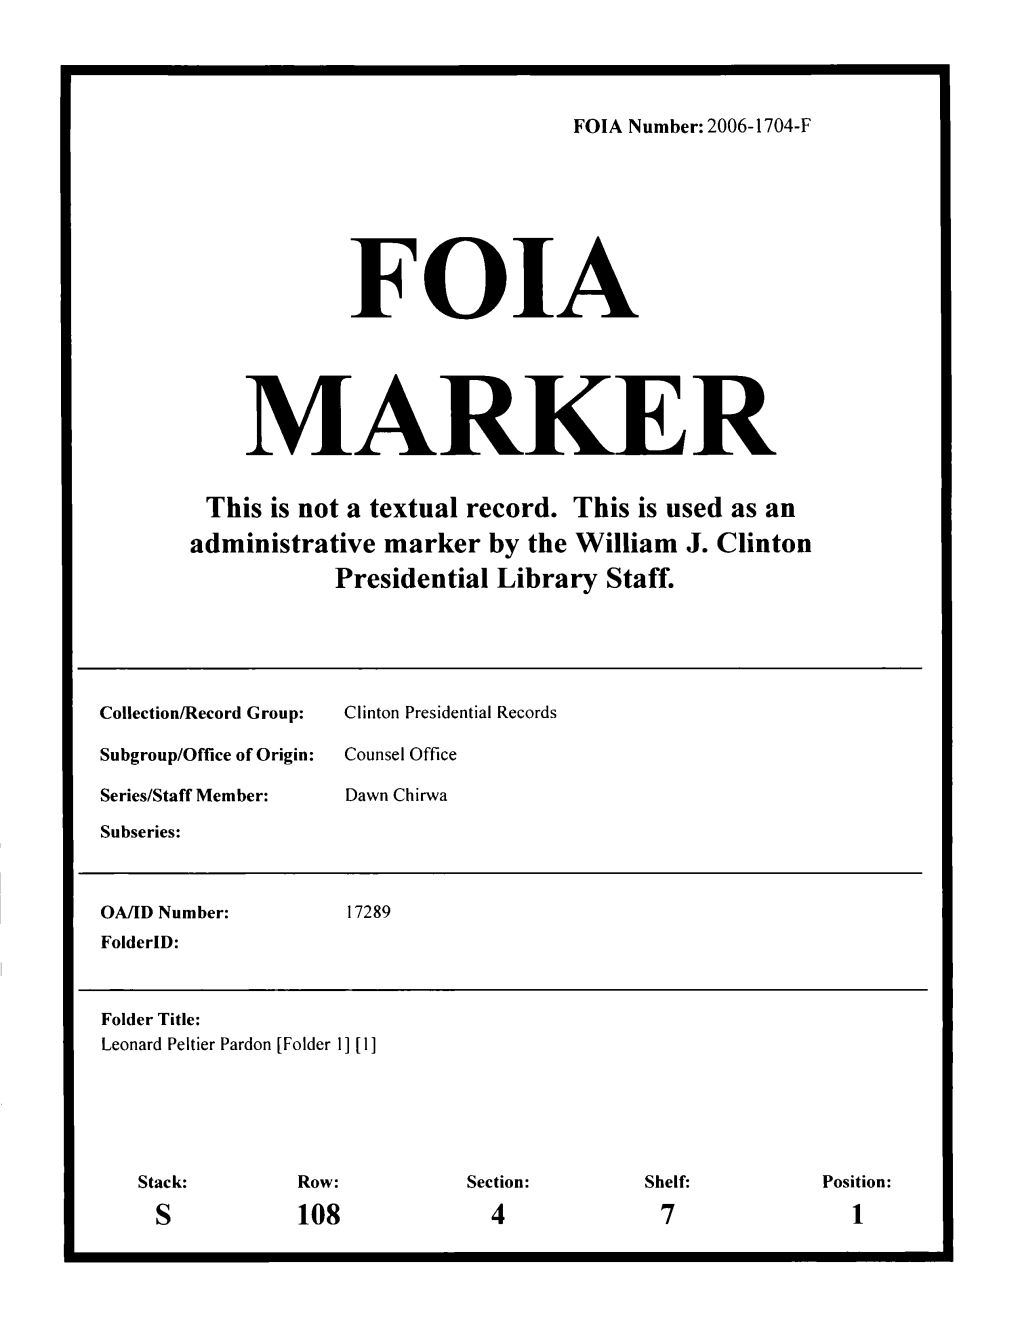 FOIA MARKER This Is Not a Textual Record